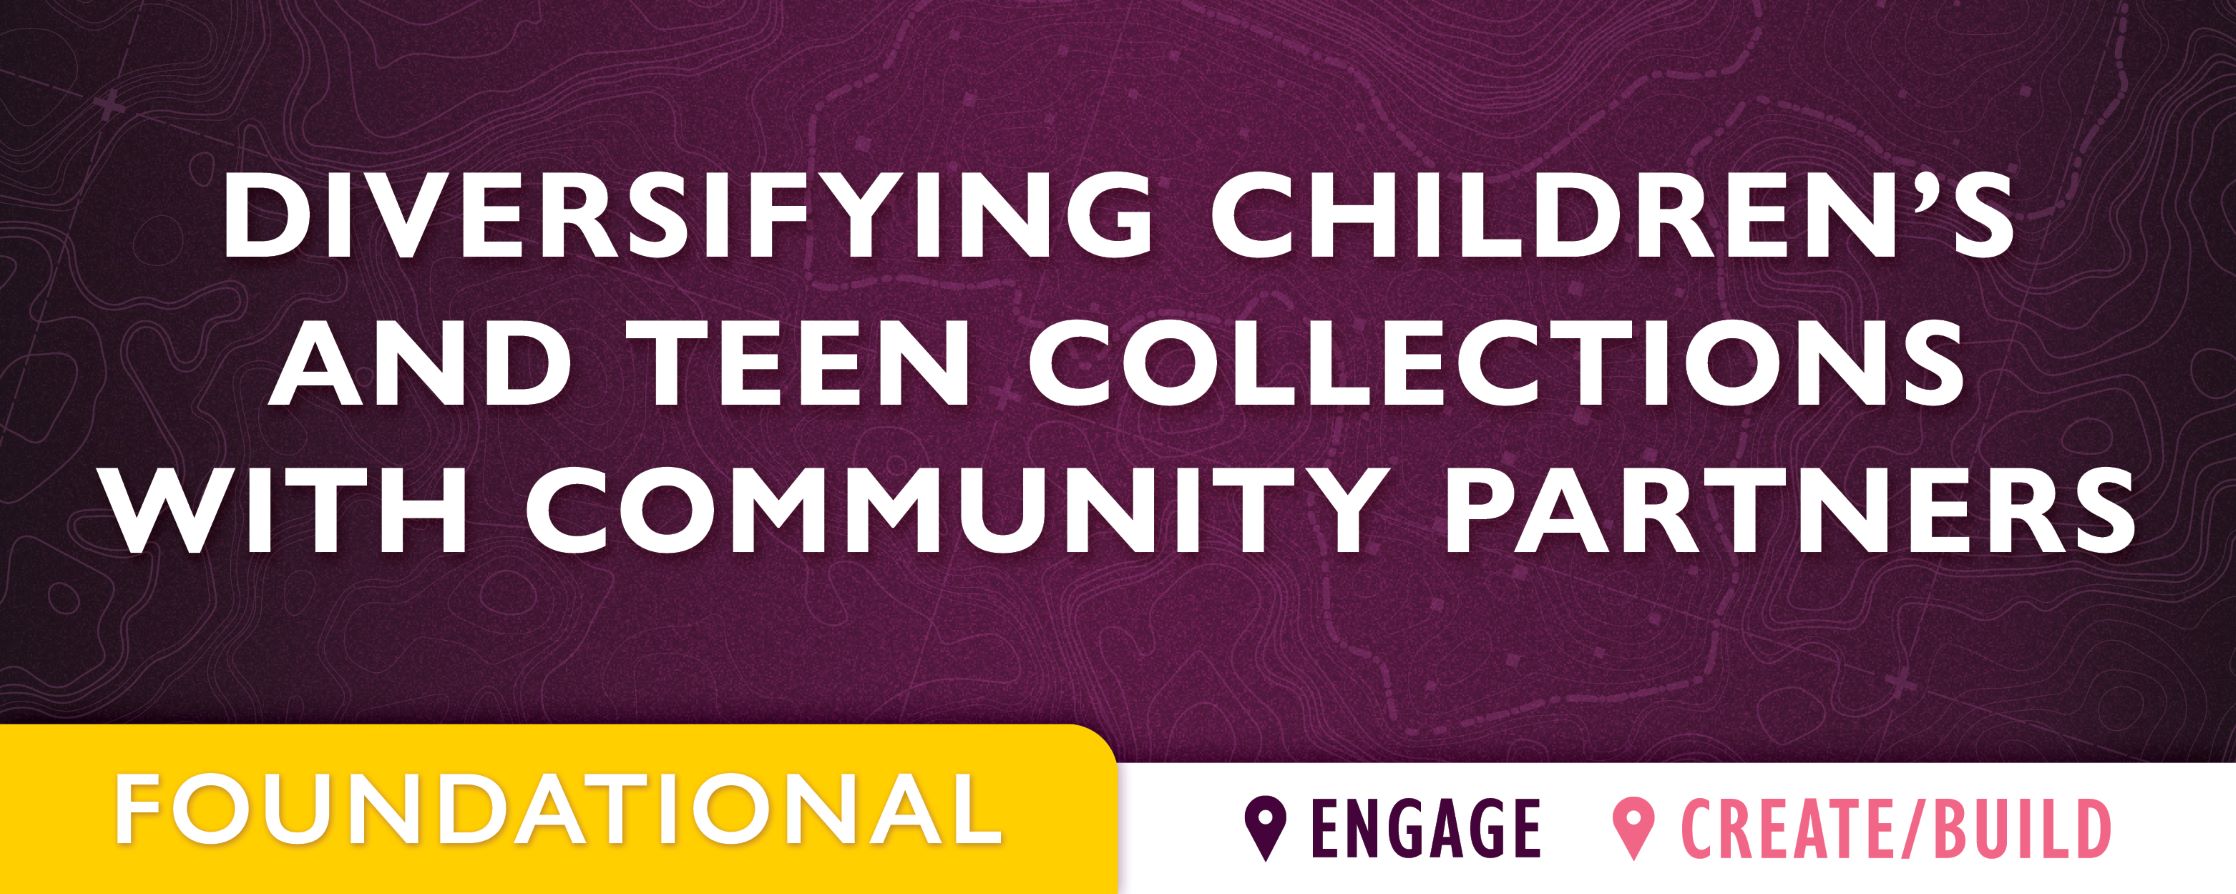 purple background with text: Diversifying Children's and Teen Collections with Community Partners 